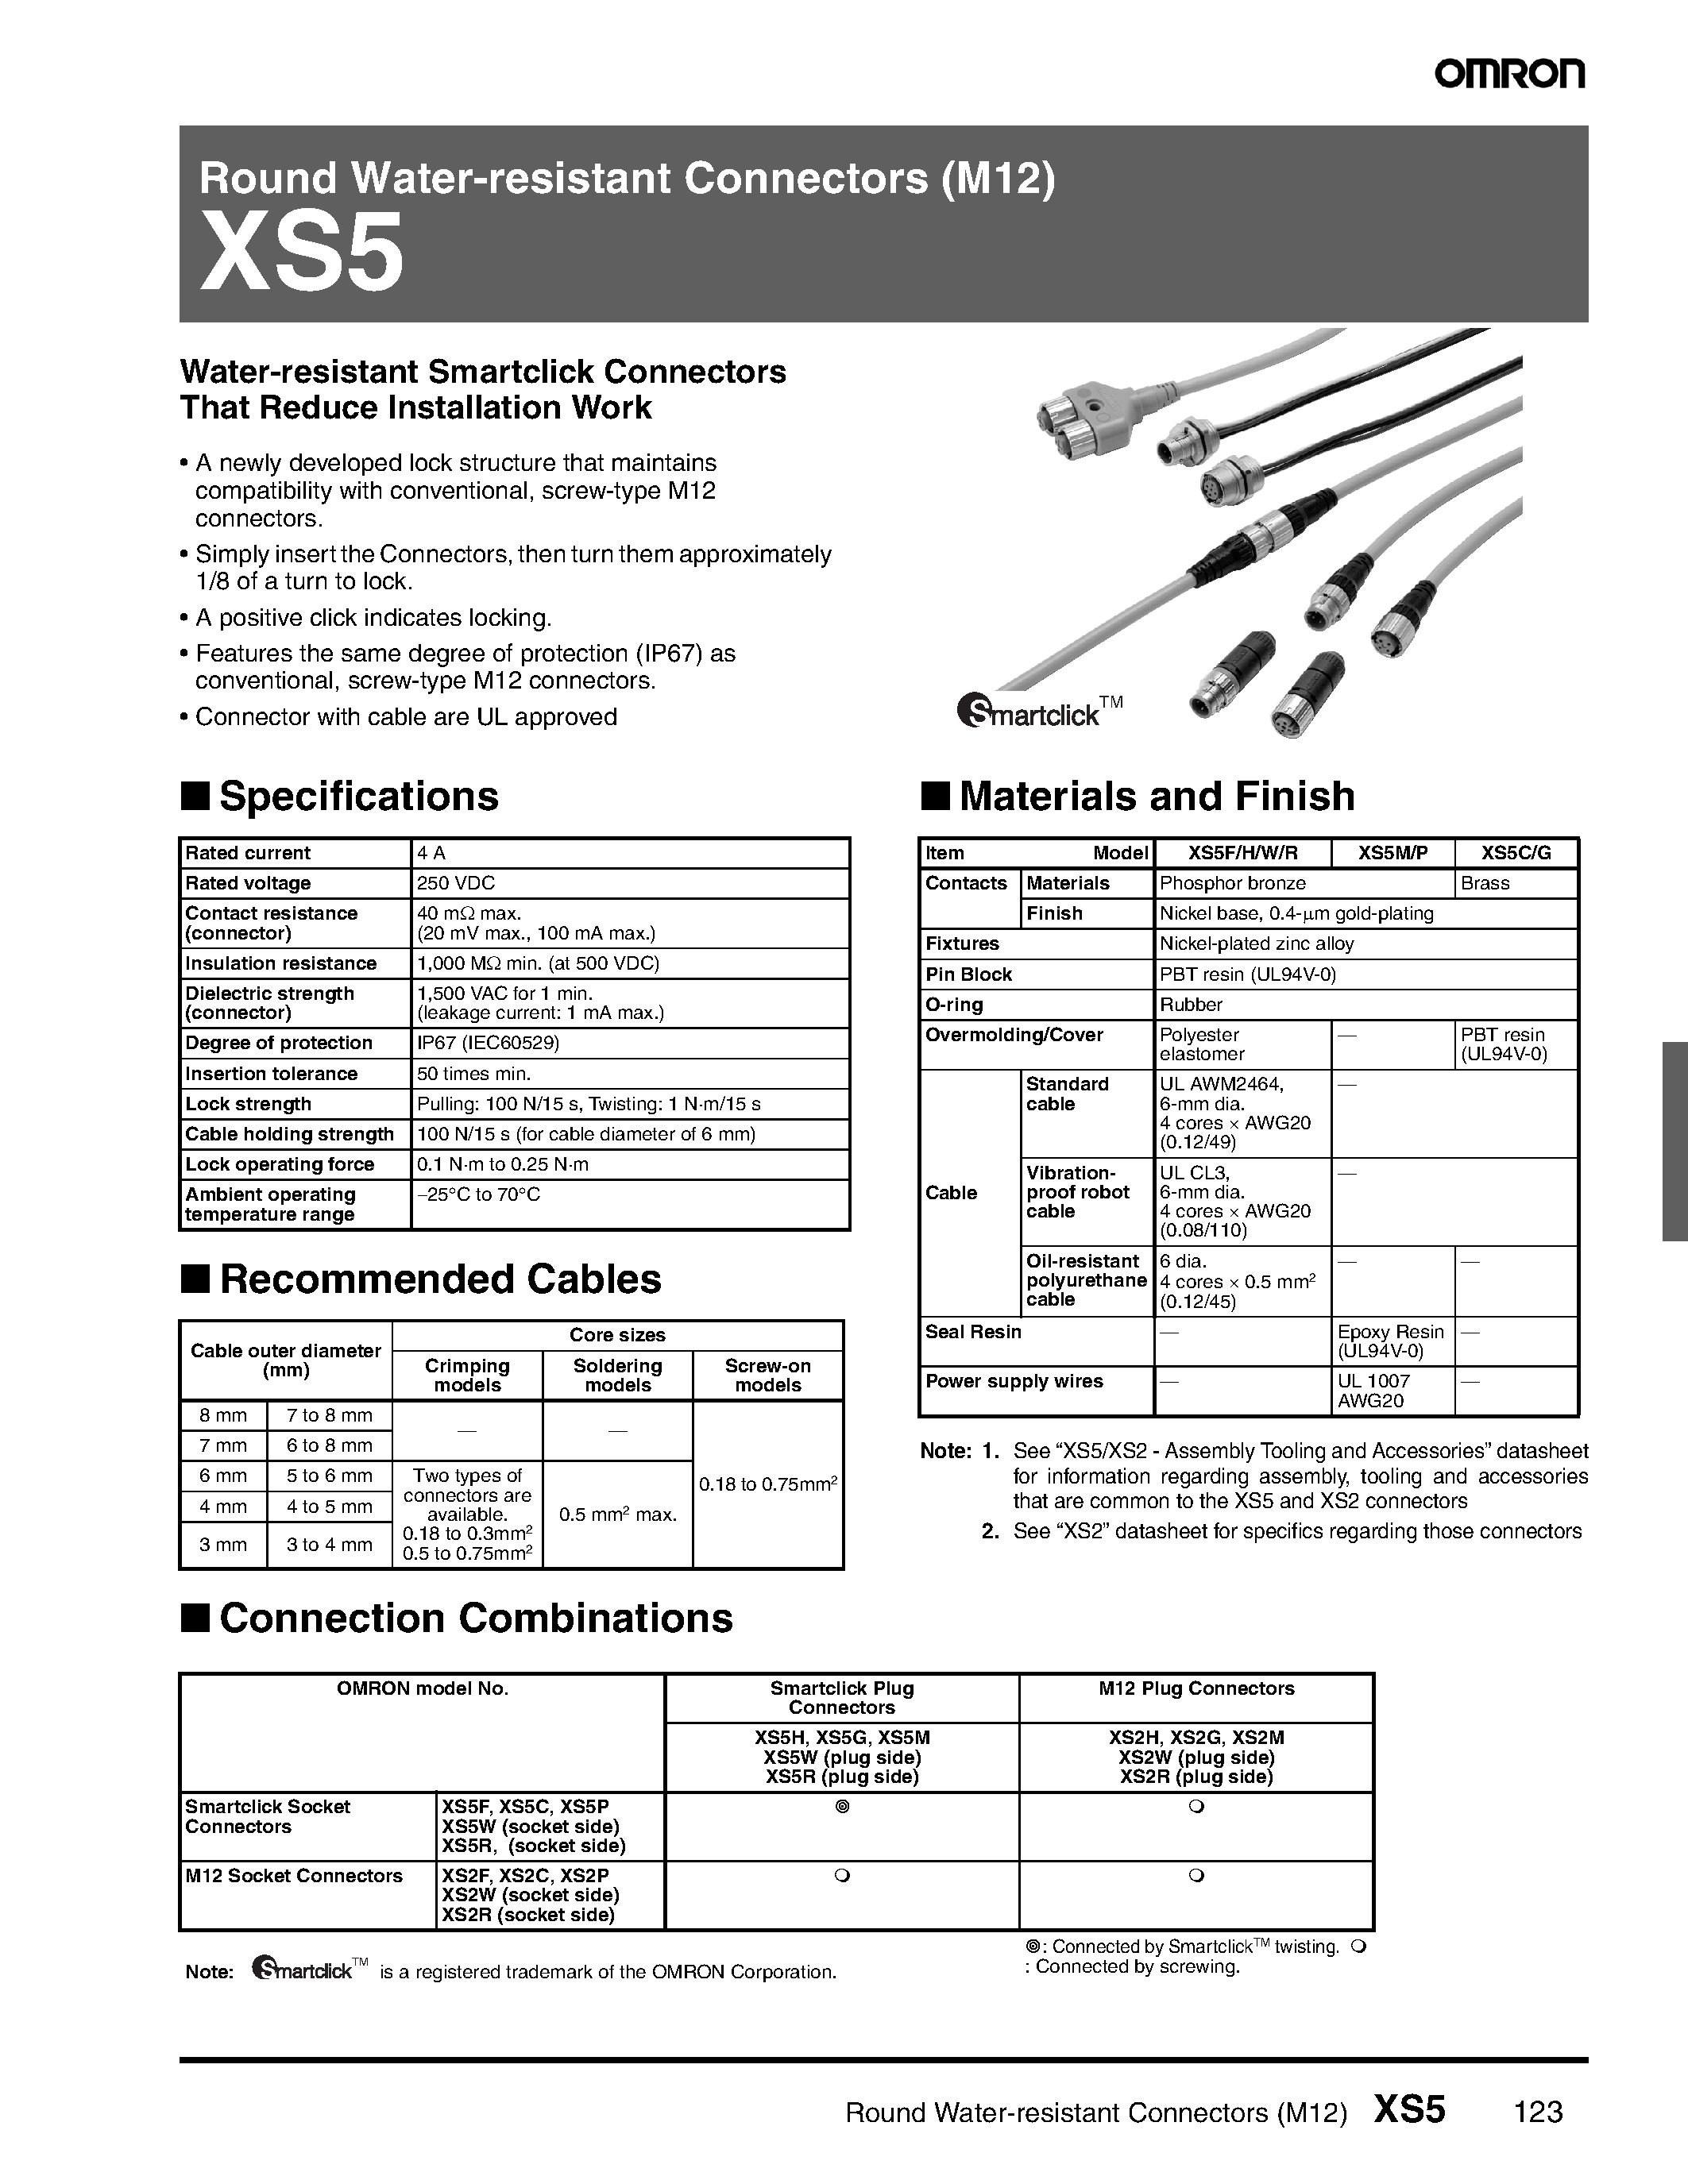 Datasheet XS5 - Round Water-resistant Connectors page 1